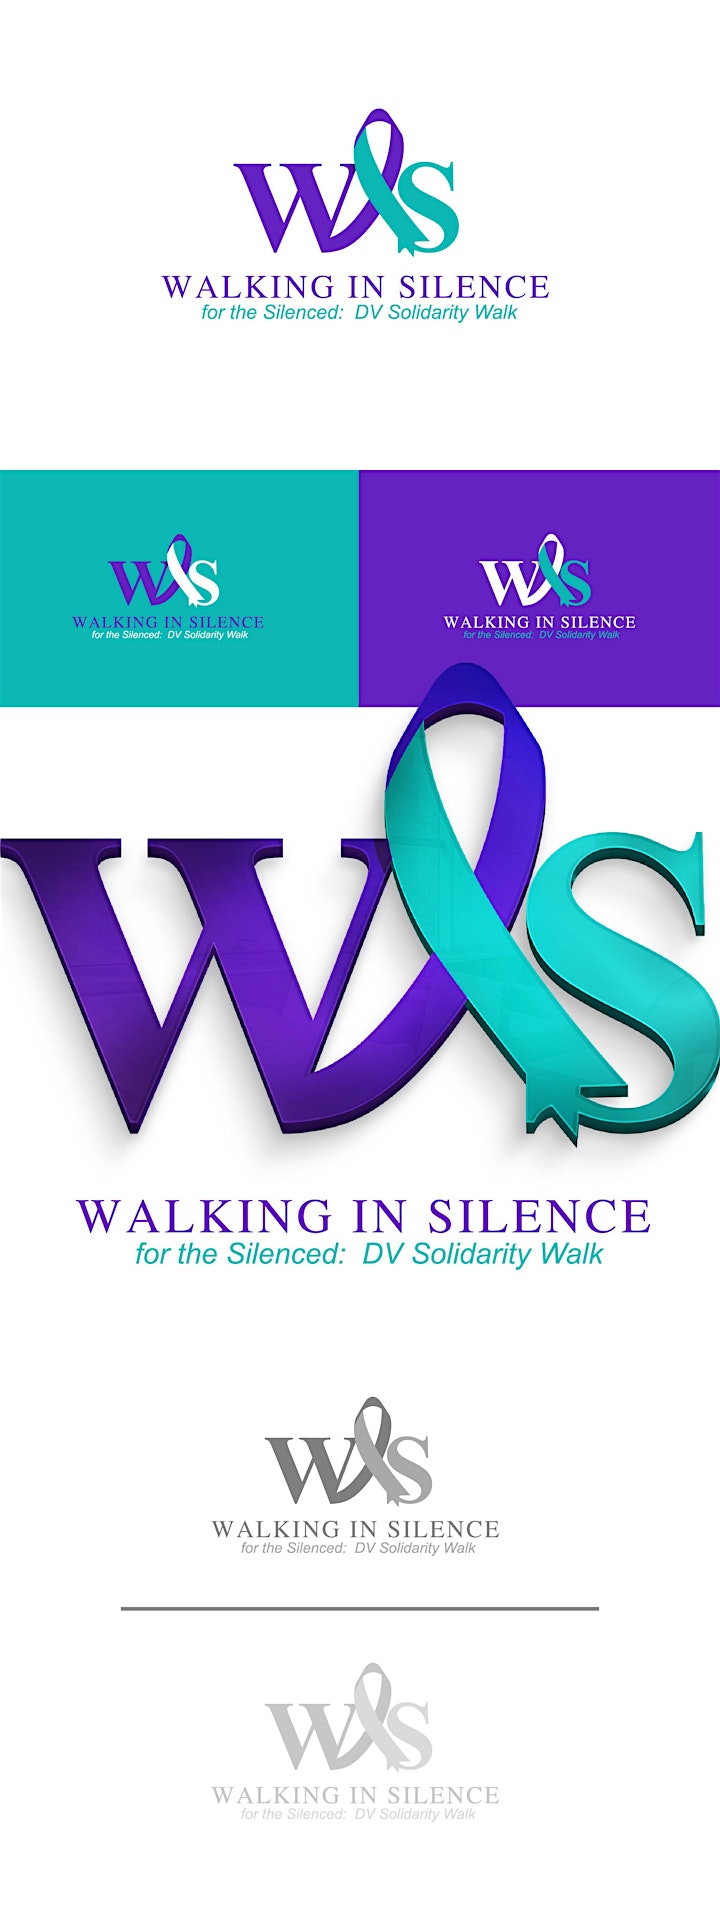 Walking In Silence for the Silenced:  DV Solidarity Walk image